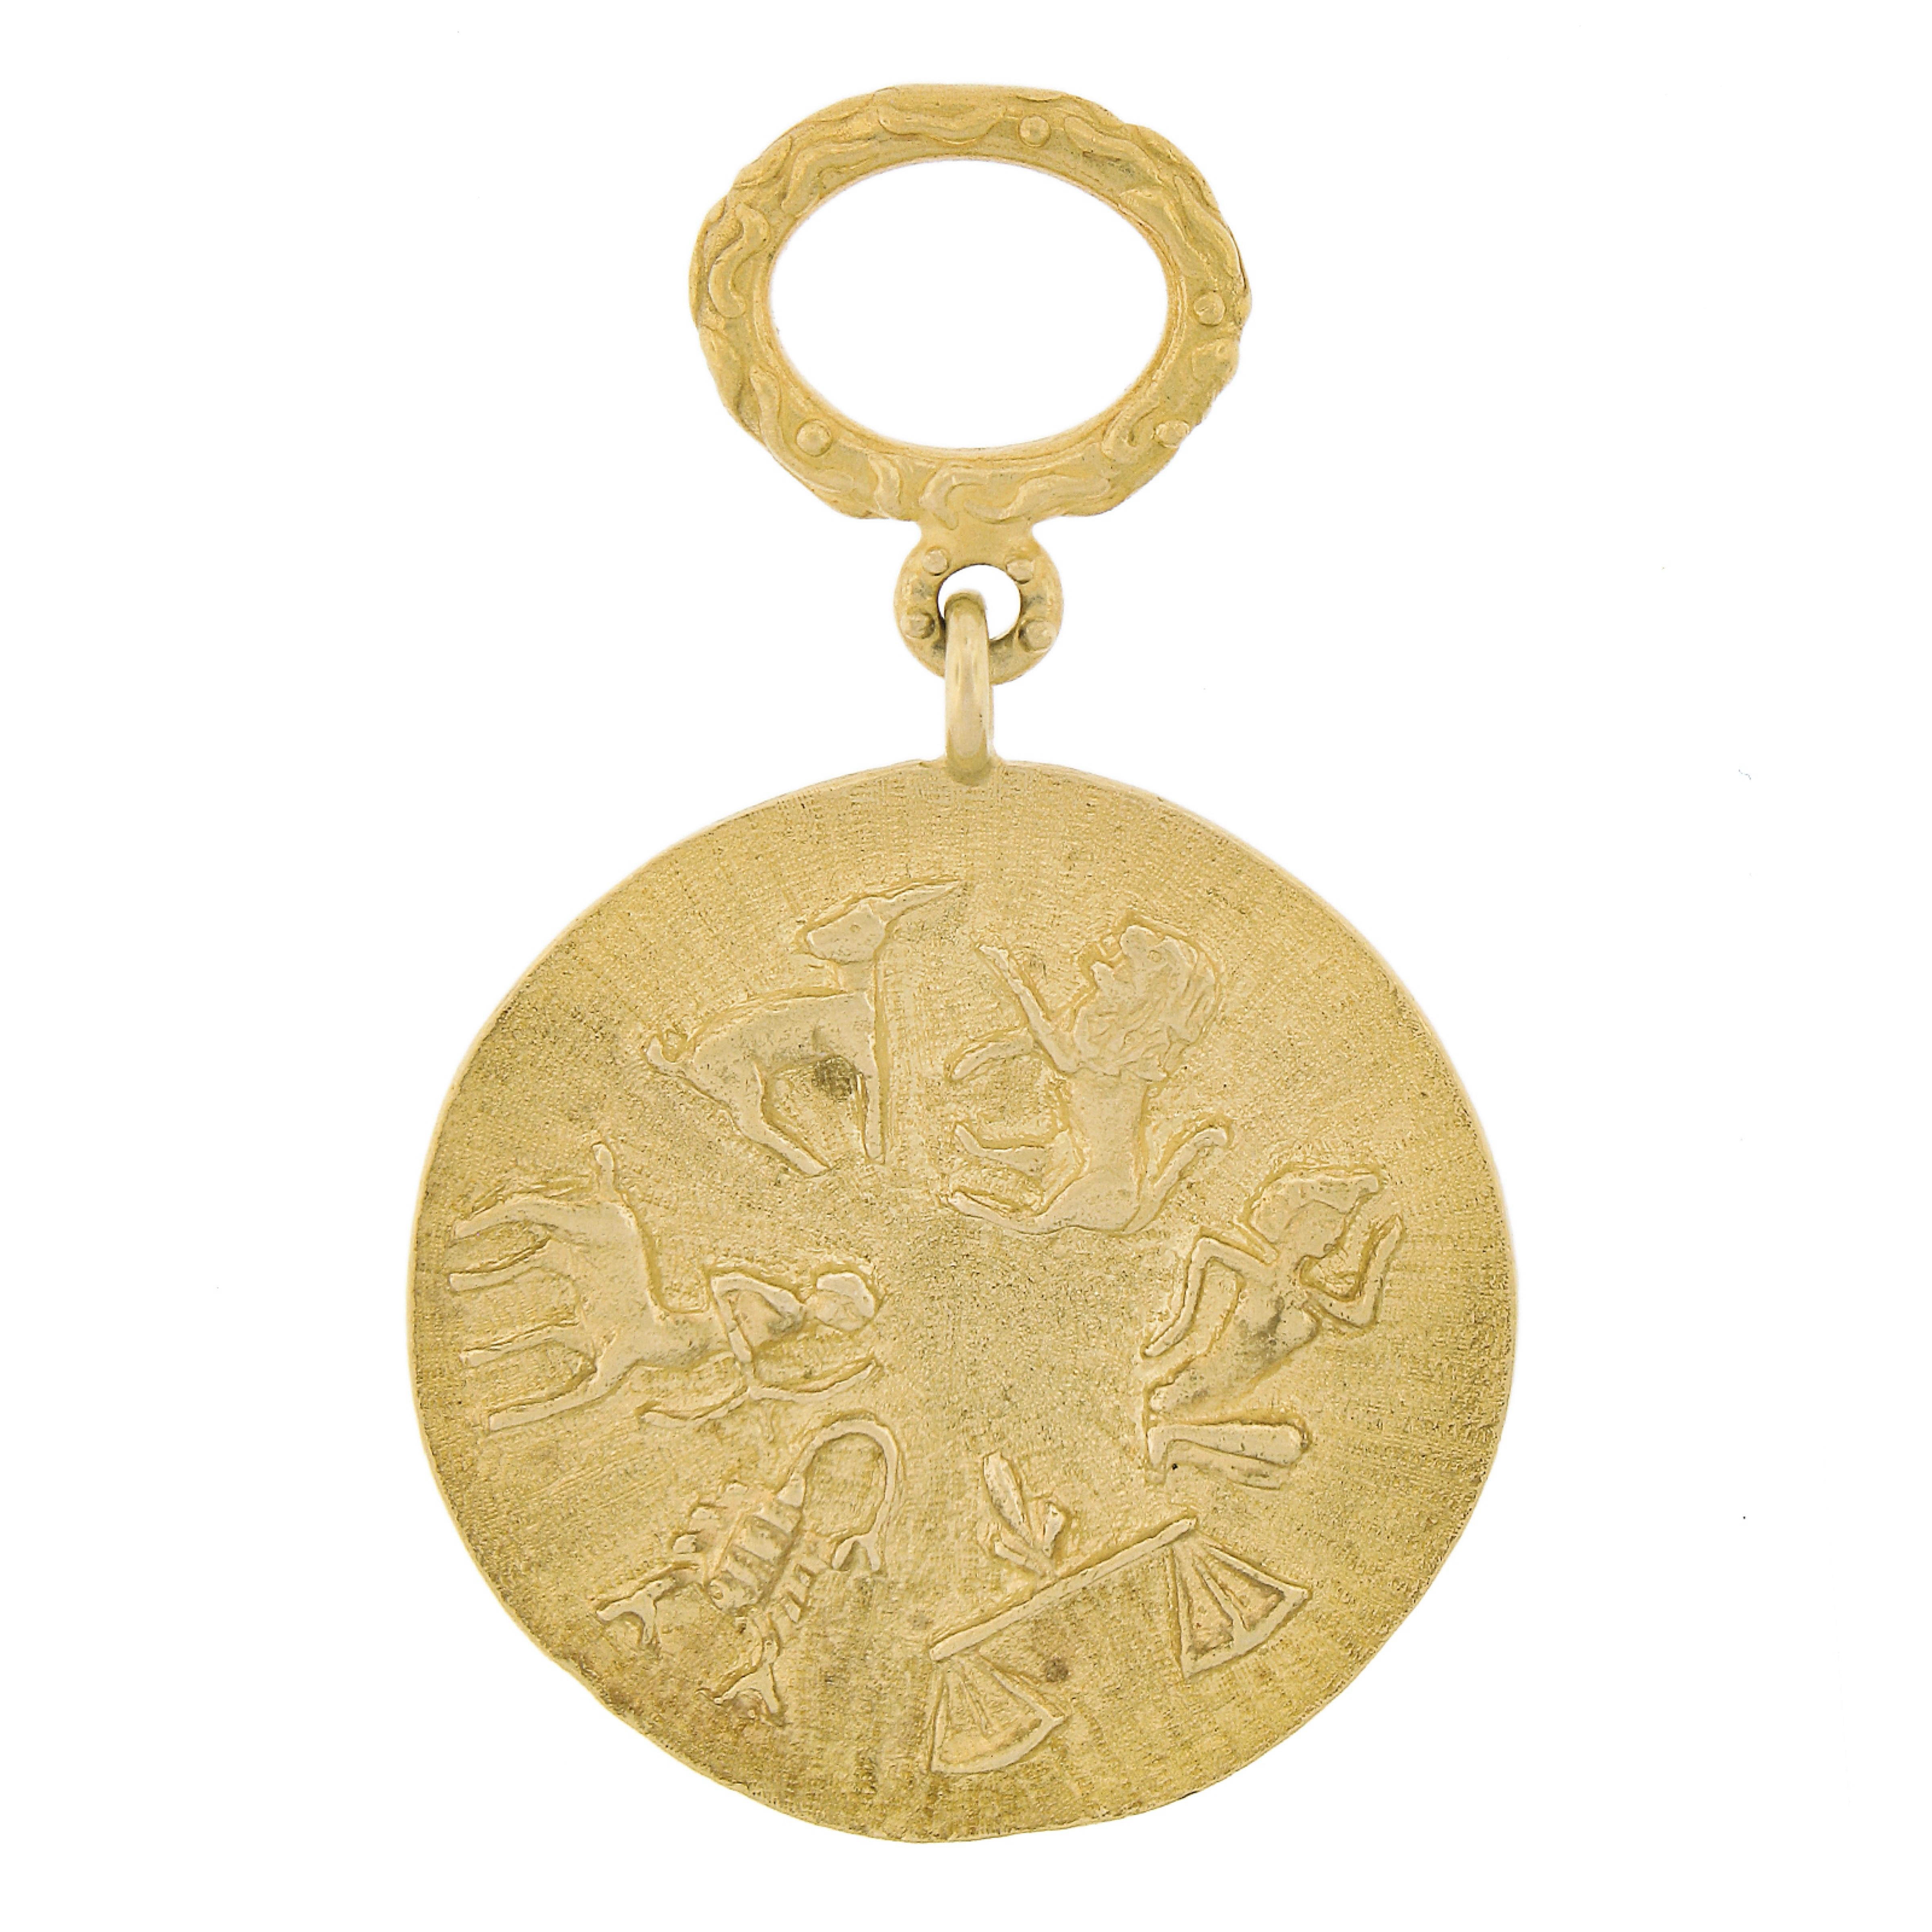 Material: 18K Solid Yellow Gold
Weight: 17.20 Grams
Chain Type: Not Included
Bail Dimensions (inside): 8.3x10.9mm (approx.)
Width/Diameter: 33mm (1.3